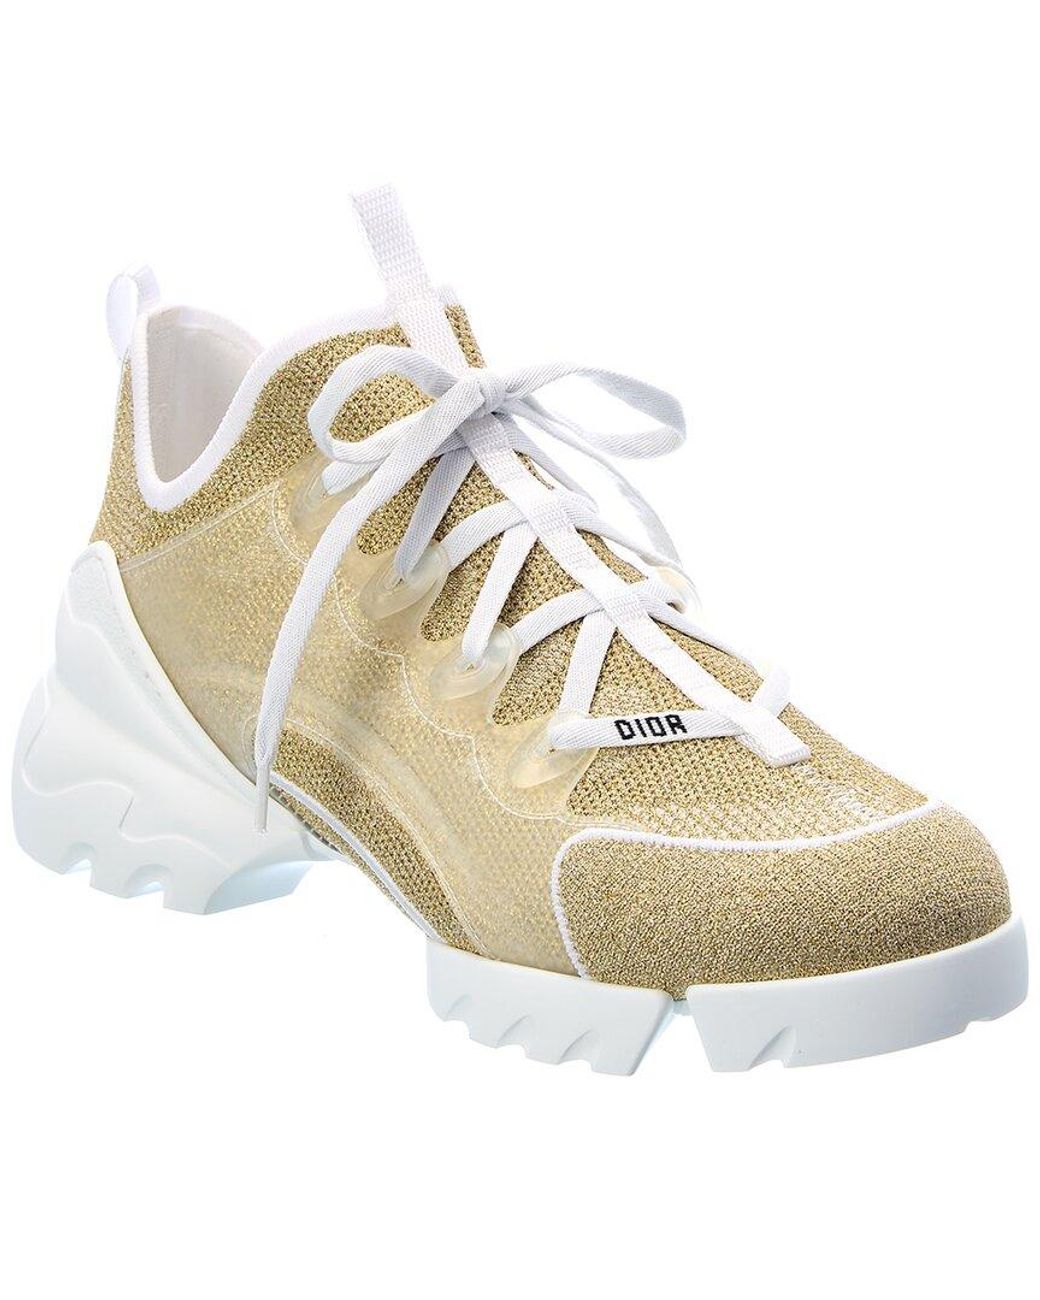 Dior D-connect Knit Sneaker in White | Lyst